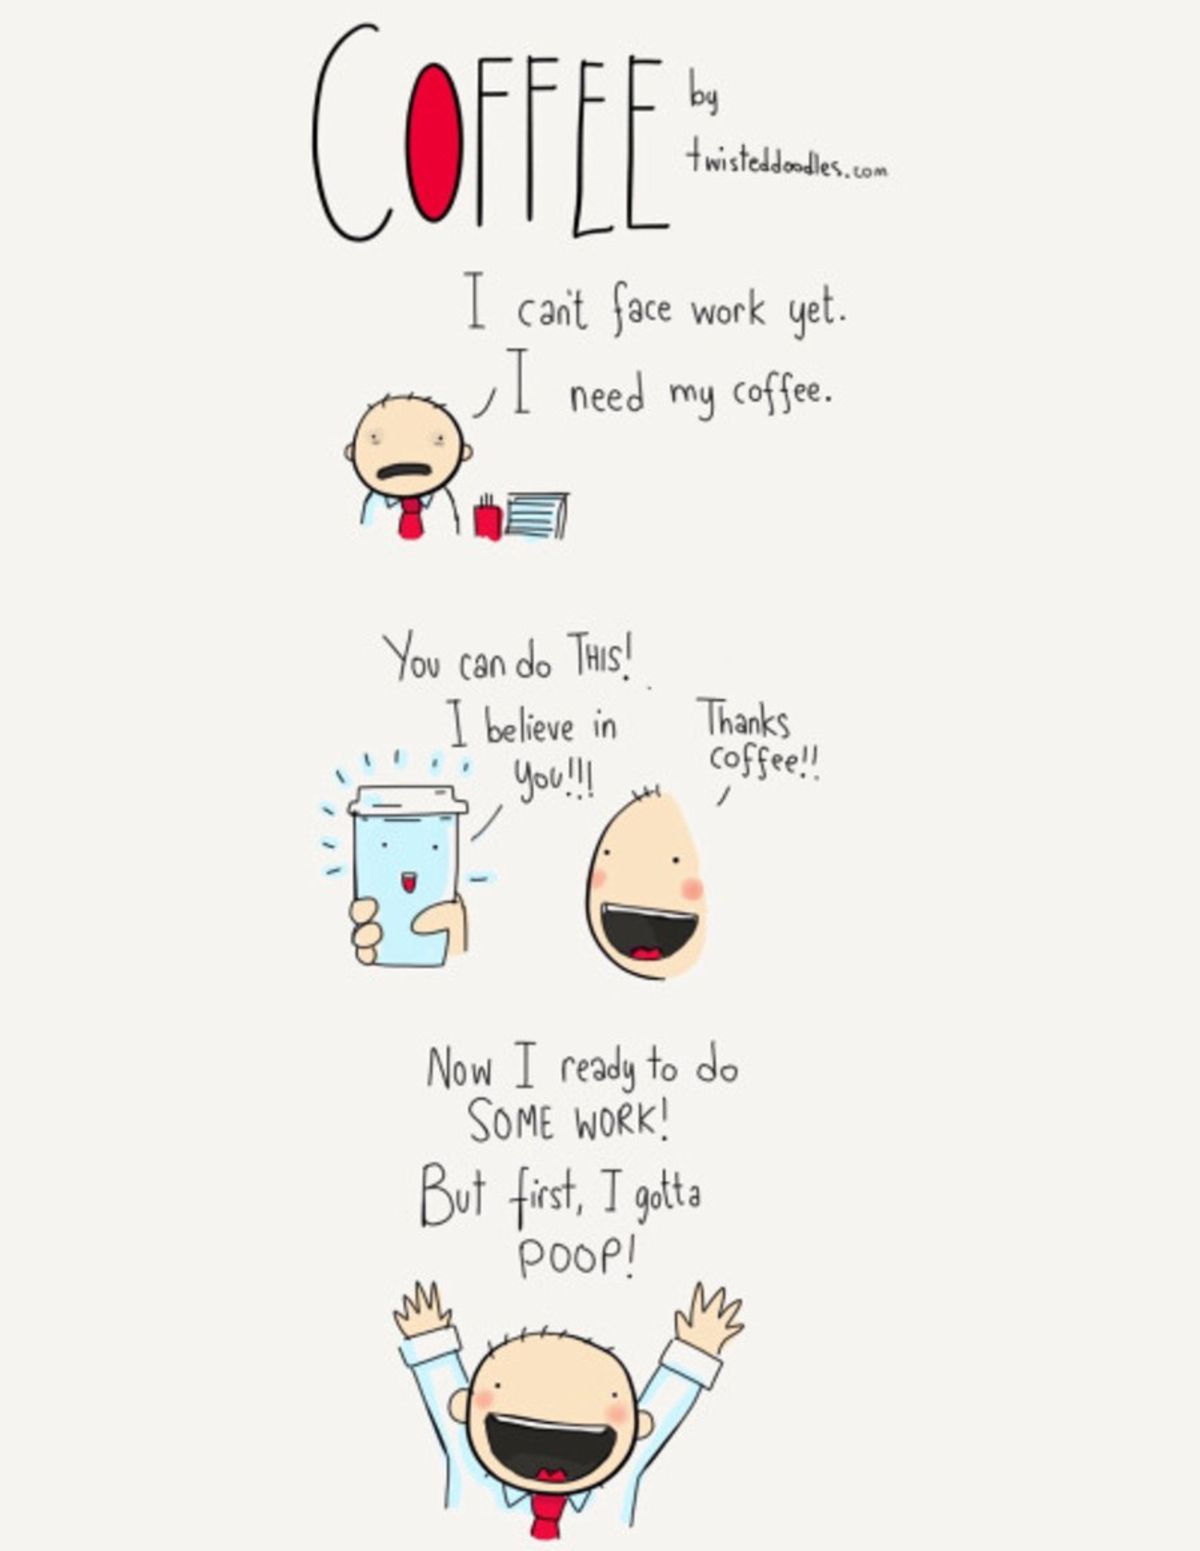 22 Reasons Why You’re a Coffee Addict